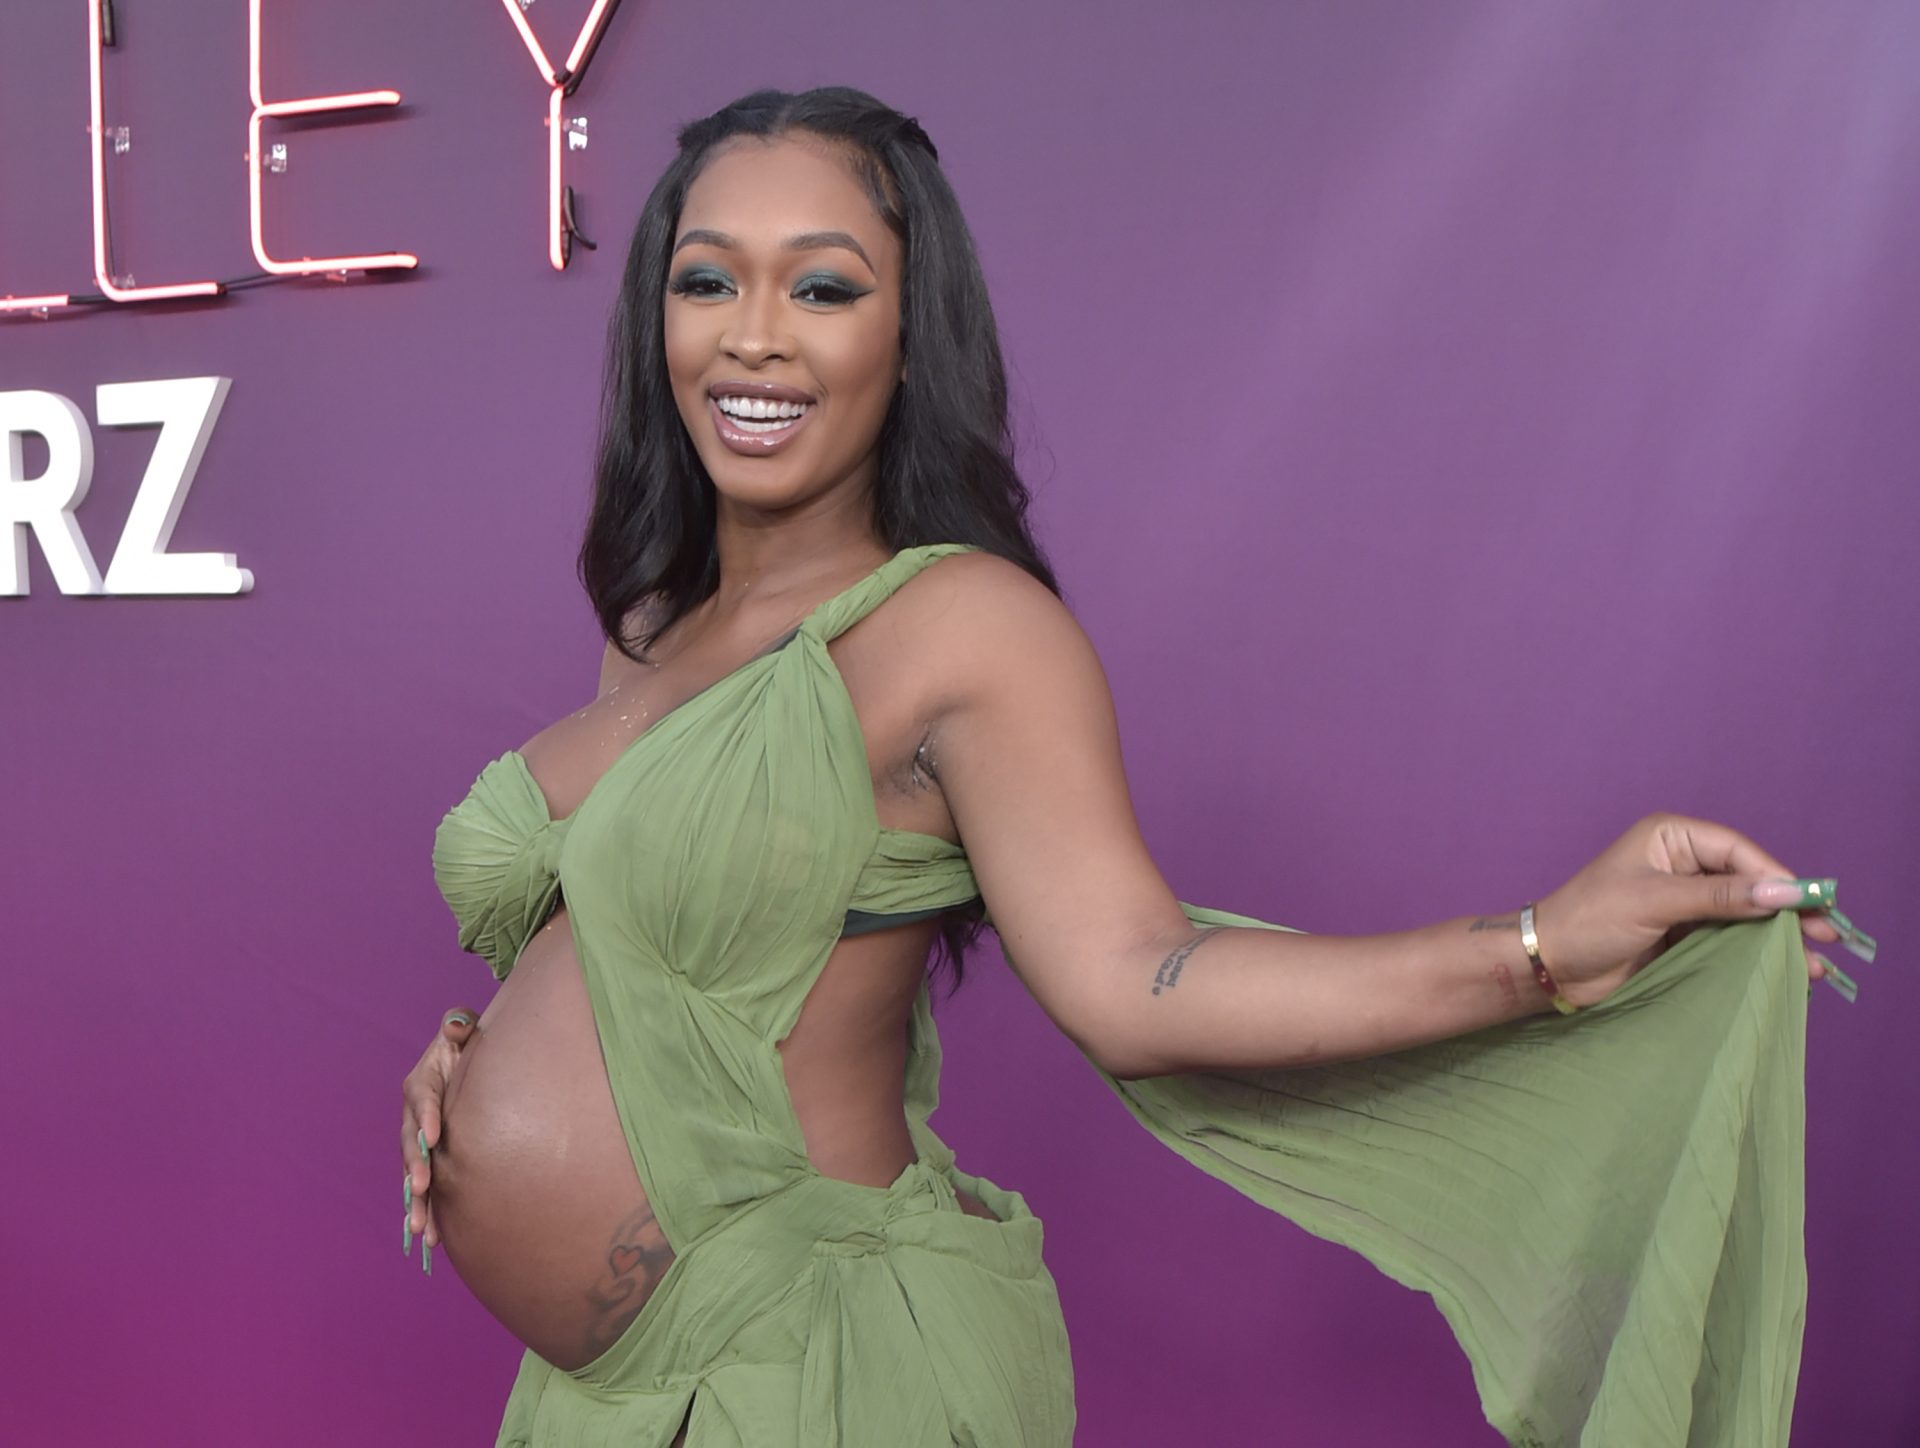 Miracle Watts Bounces Her Baby Bump On The Dance Floor At “P-Valley” Season 2 Premiere Party